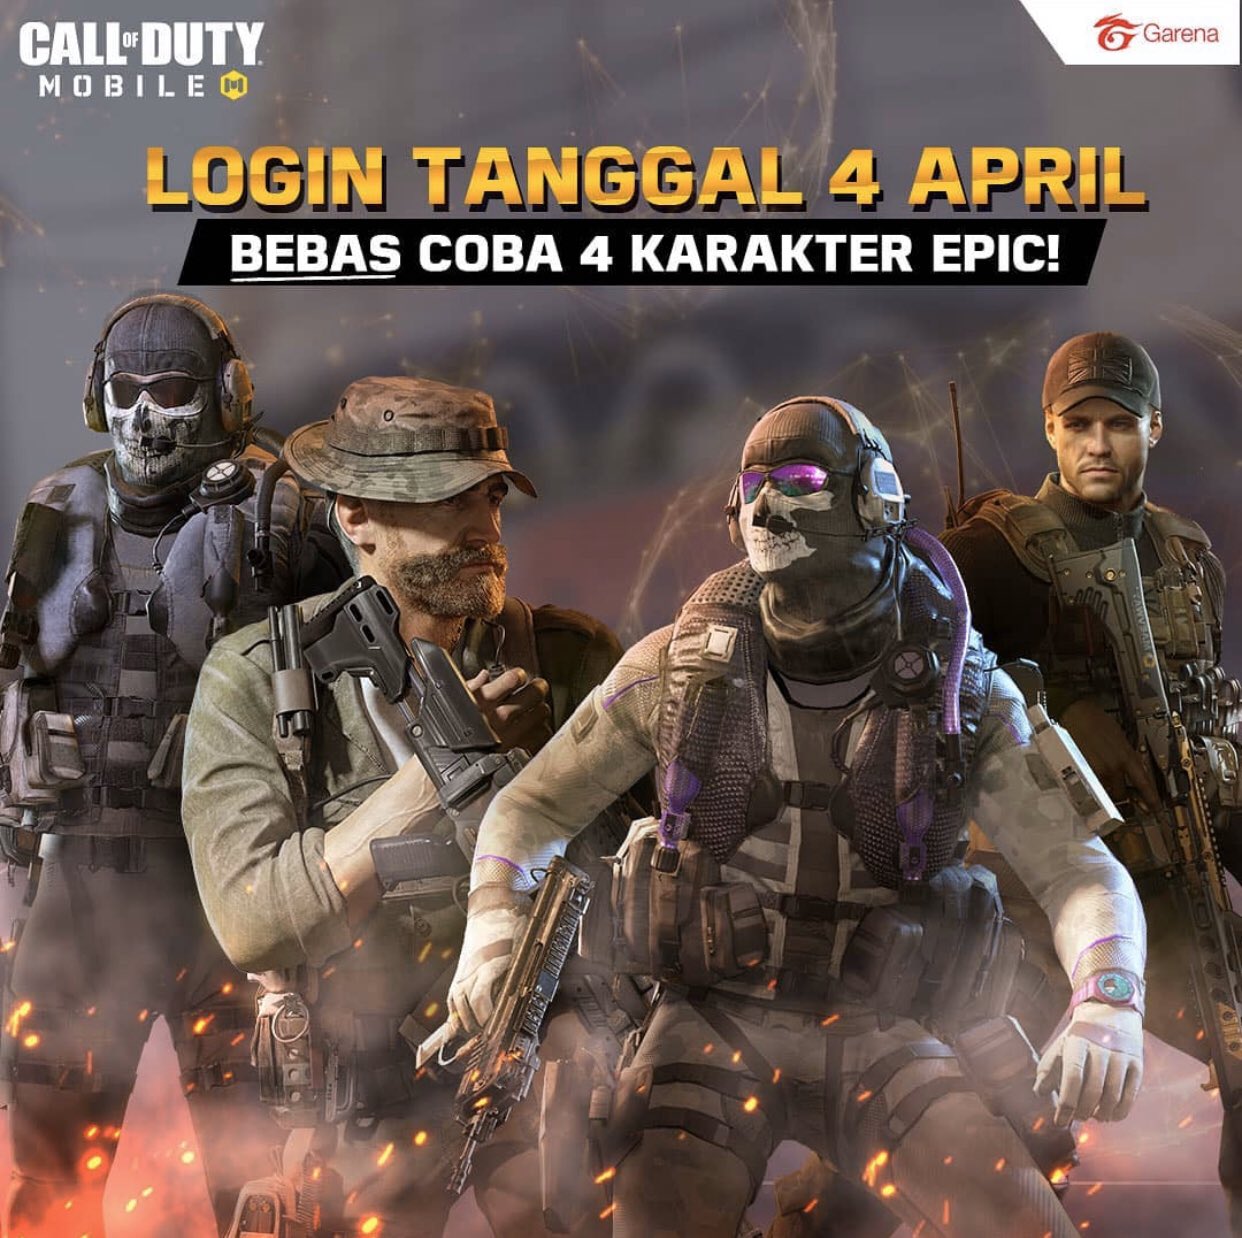 COD Mobile News & Leaks on X: #CODMobile Login on April 4 and